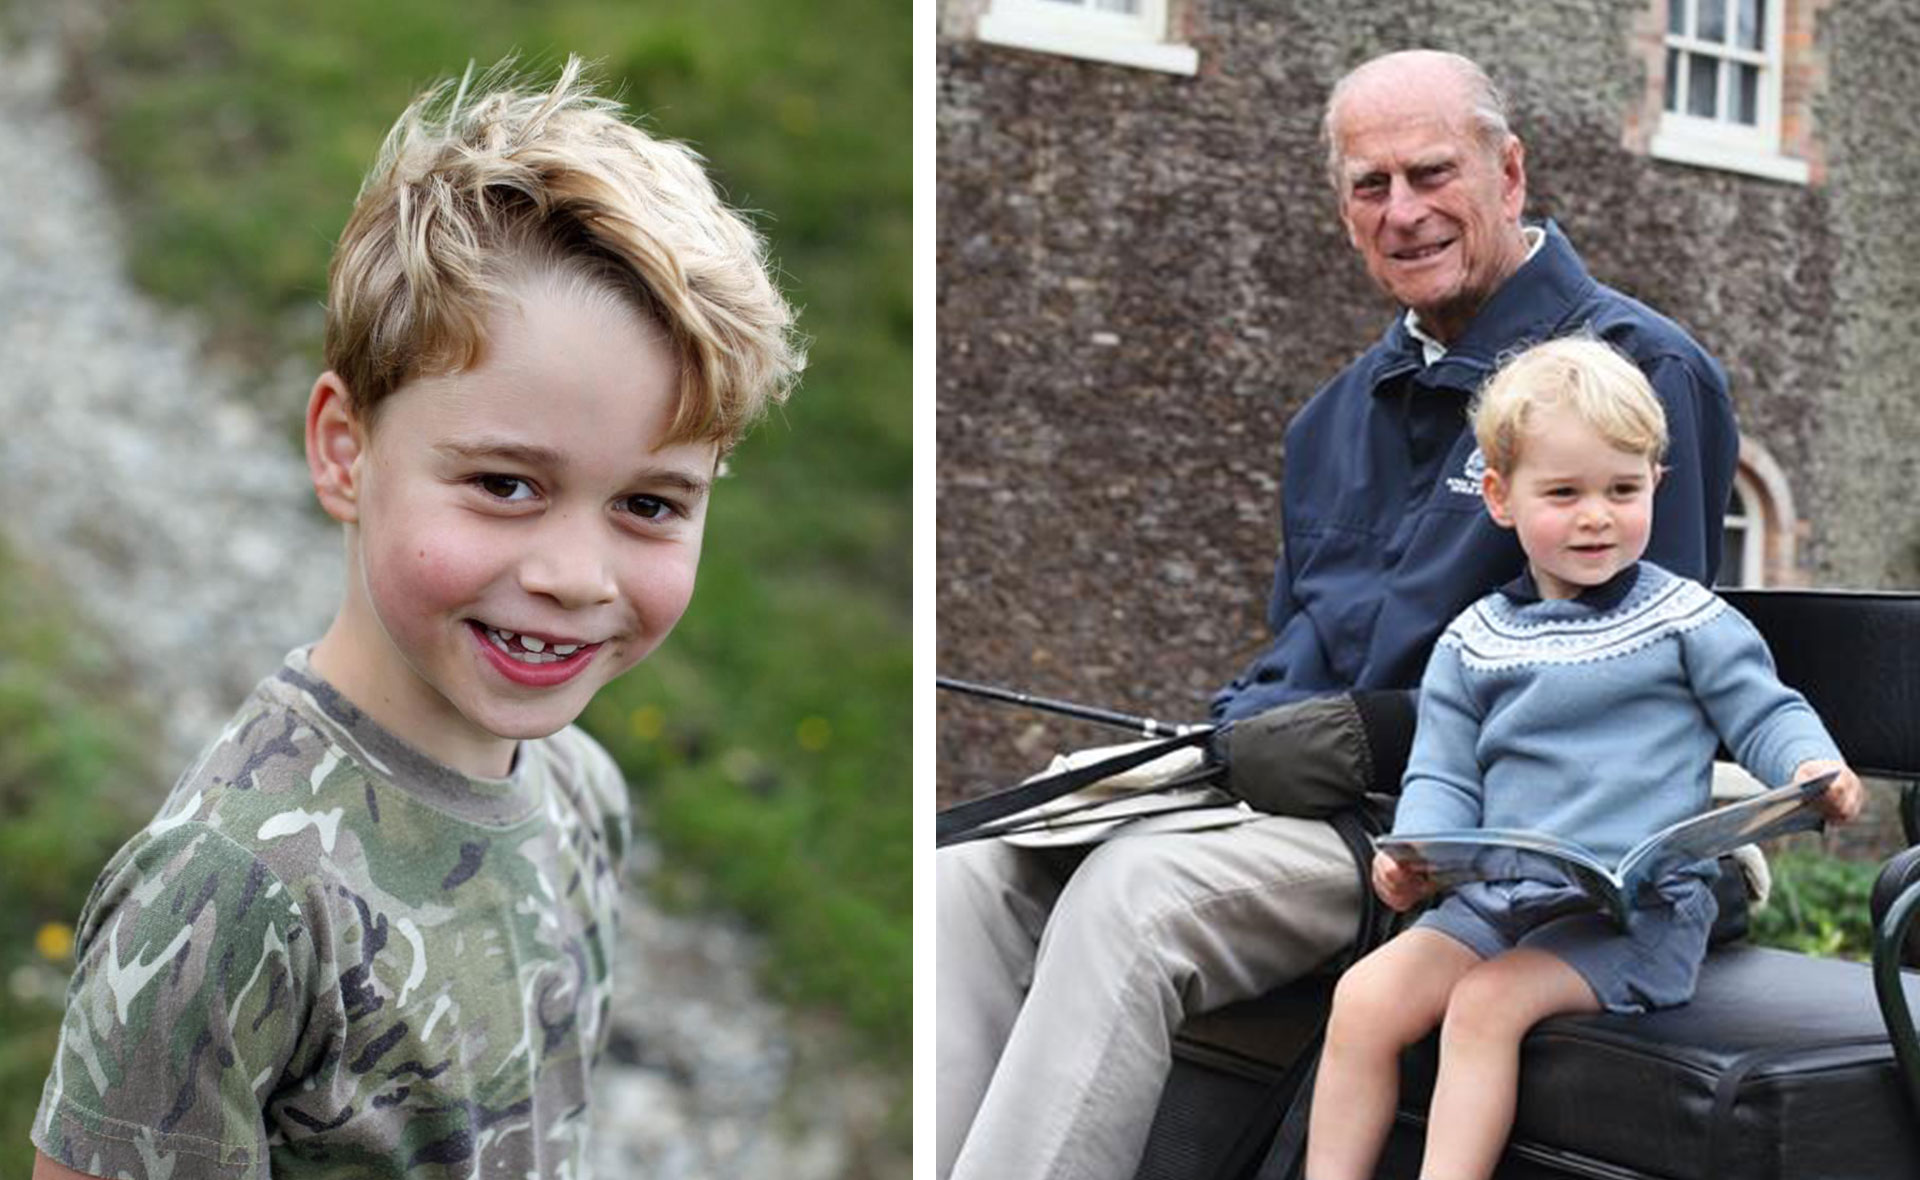 King in training: Will Prince George attend Prince Philip’s funeral?